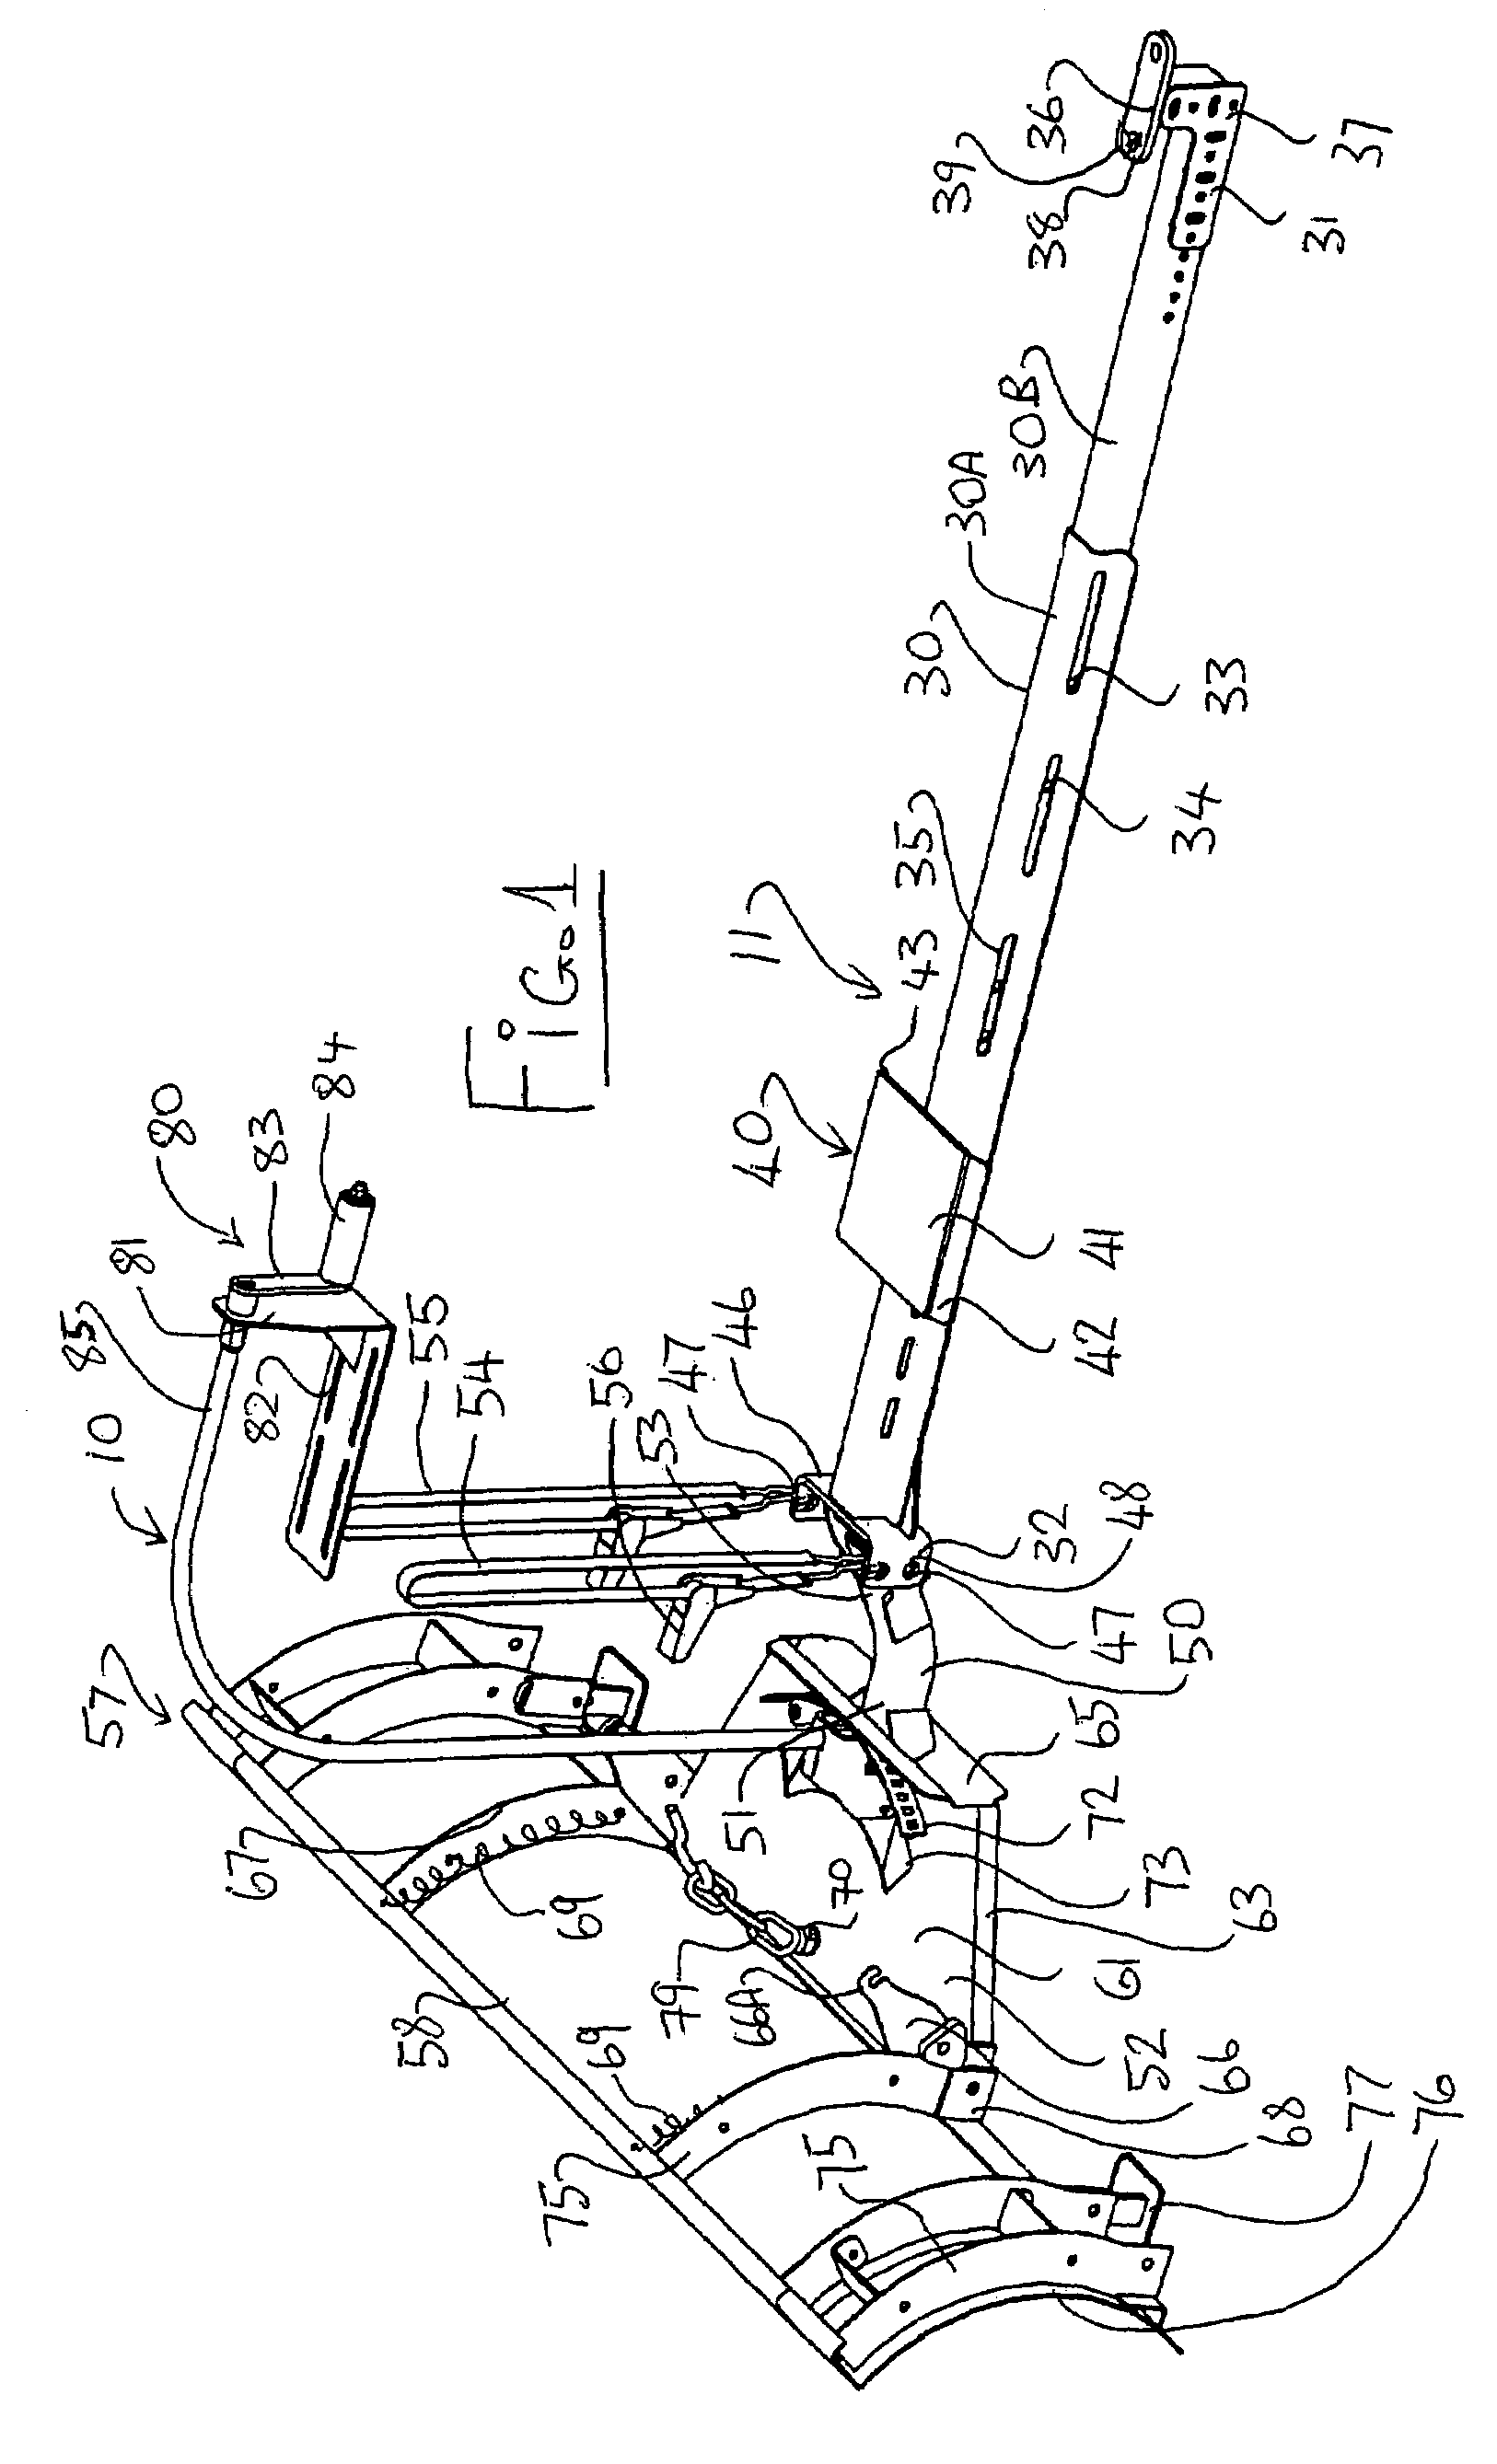 Mounting of an accessory on an ATV